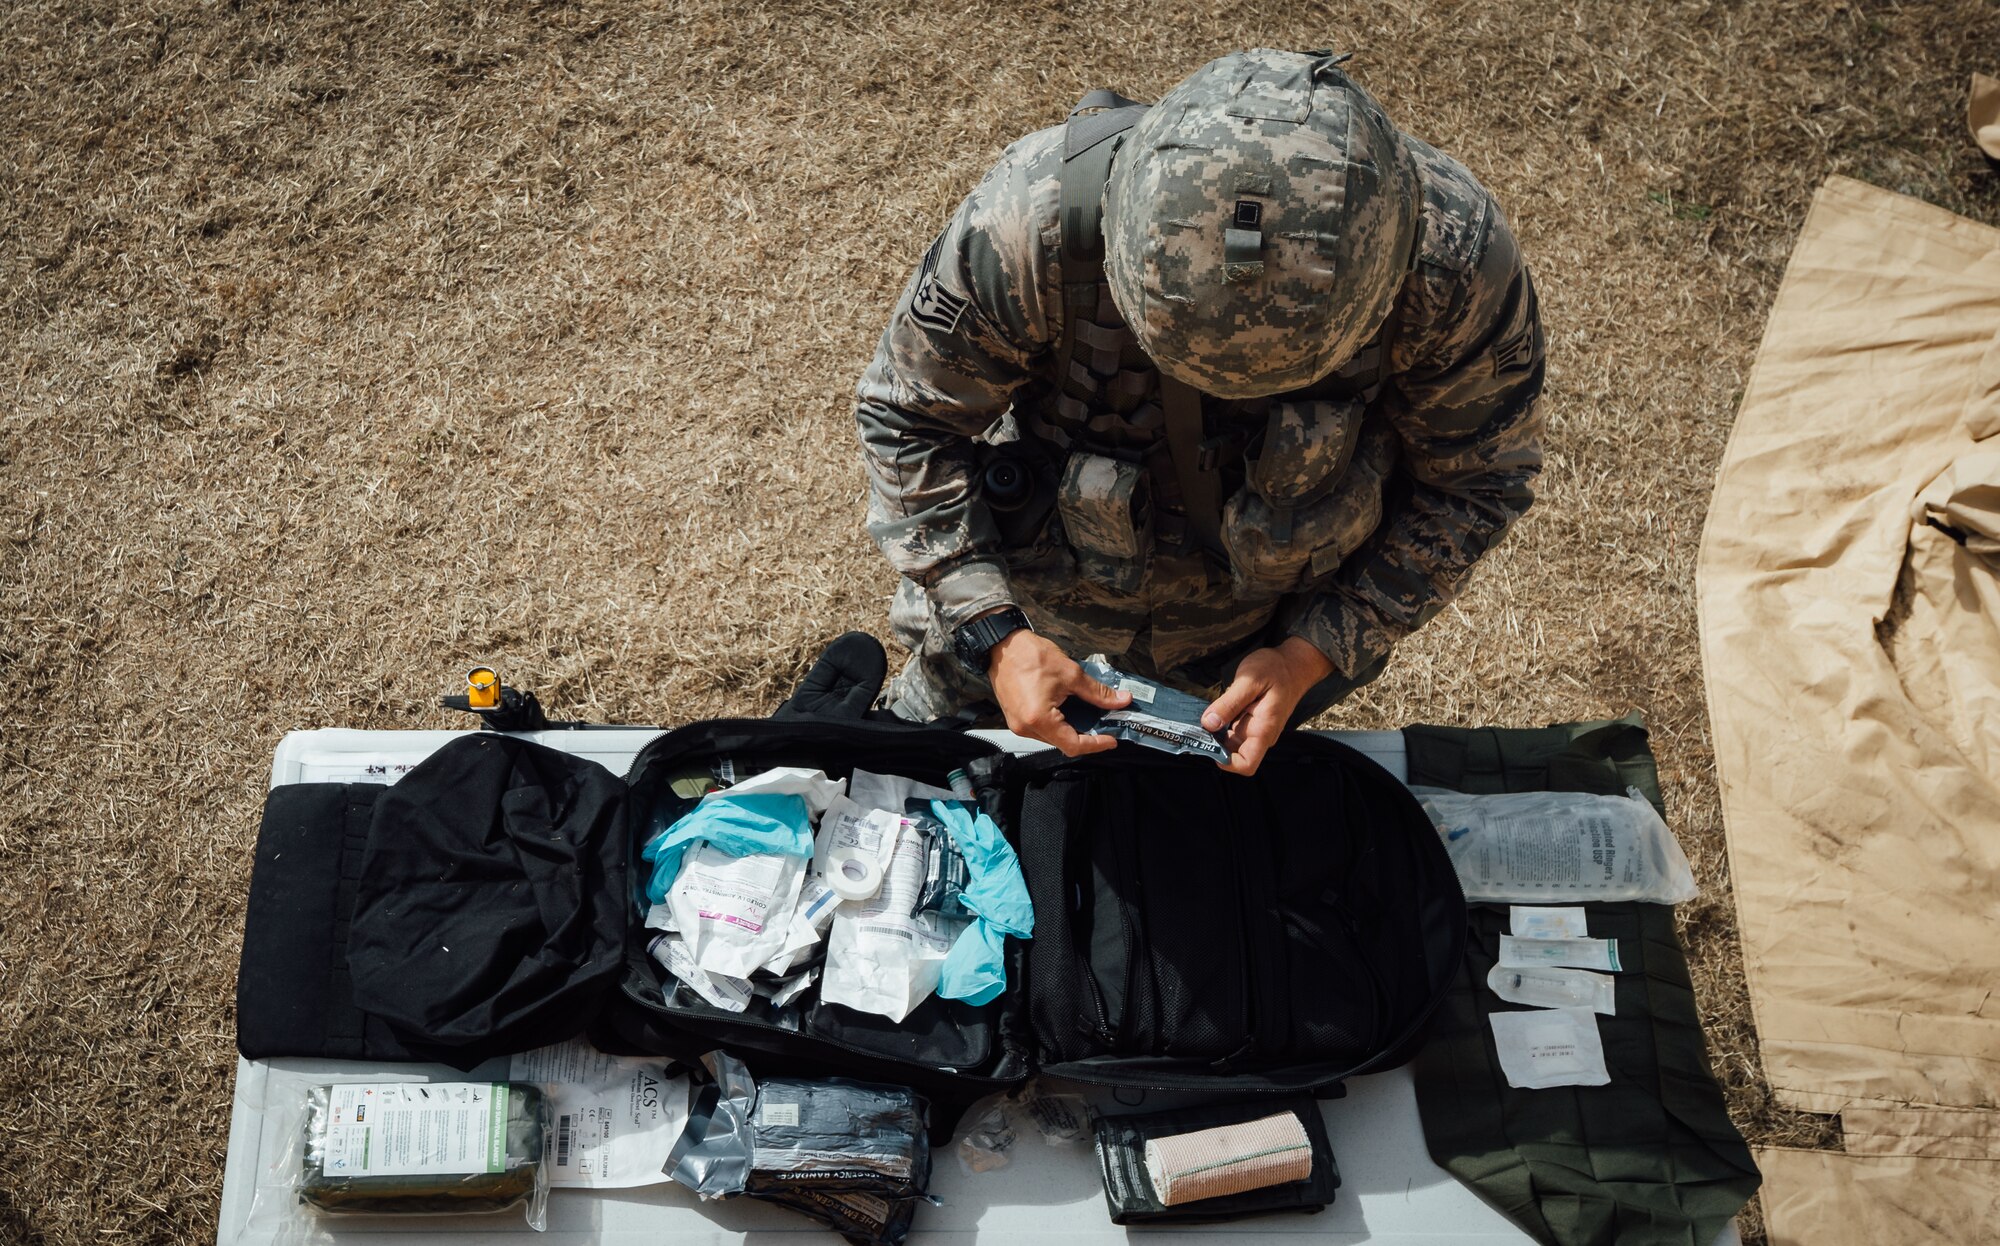 Staff Sgt. Kyle Bosshart, 446th Aeromedical Staging Squadron Expert Field Medic Badge candidate, packs a bag with medical supplies during the EFMB course at Joint Base Lewis-McChord, Wash., Sept. 24, 2015. The EFMB is the non-combat equivalent of the Combat Medical Badge and is awarded to medical personnel of the U.S. military who successfully complete a set of qualification tests. (U.S. Air Force photo by Senior Airman Jordan Castelan/Released)